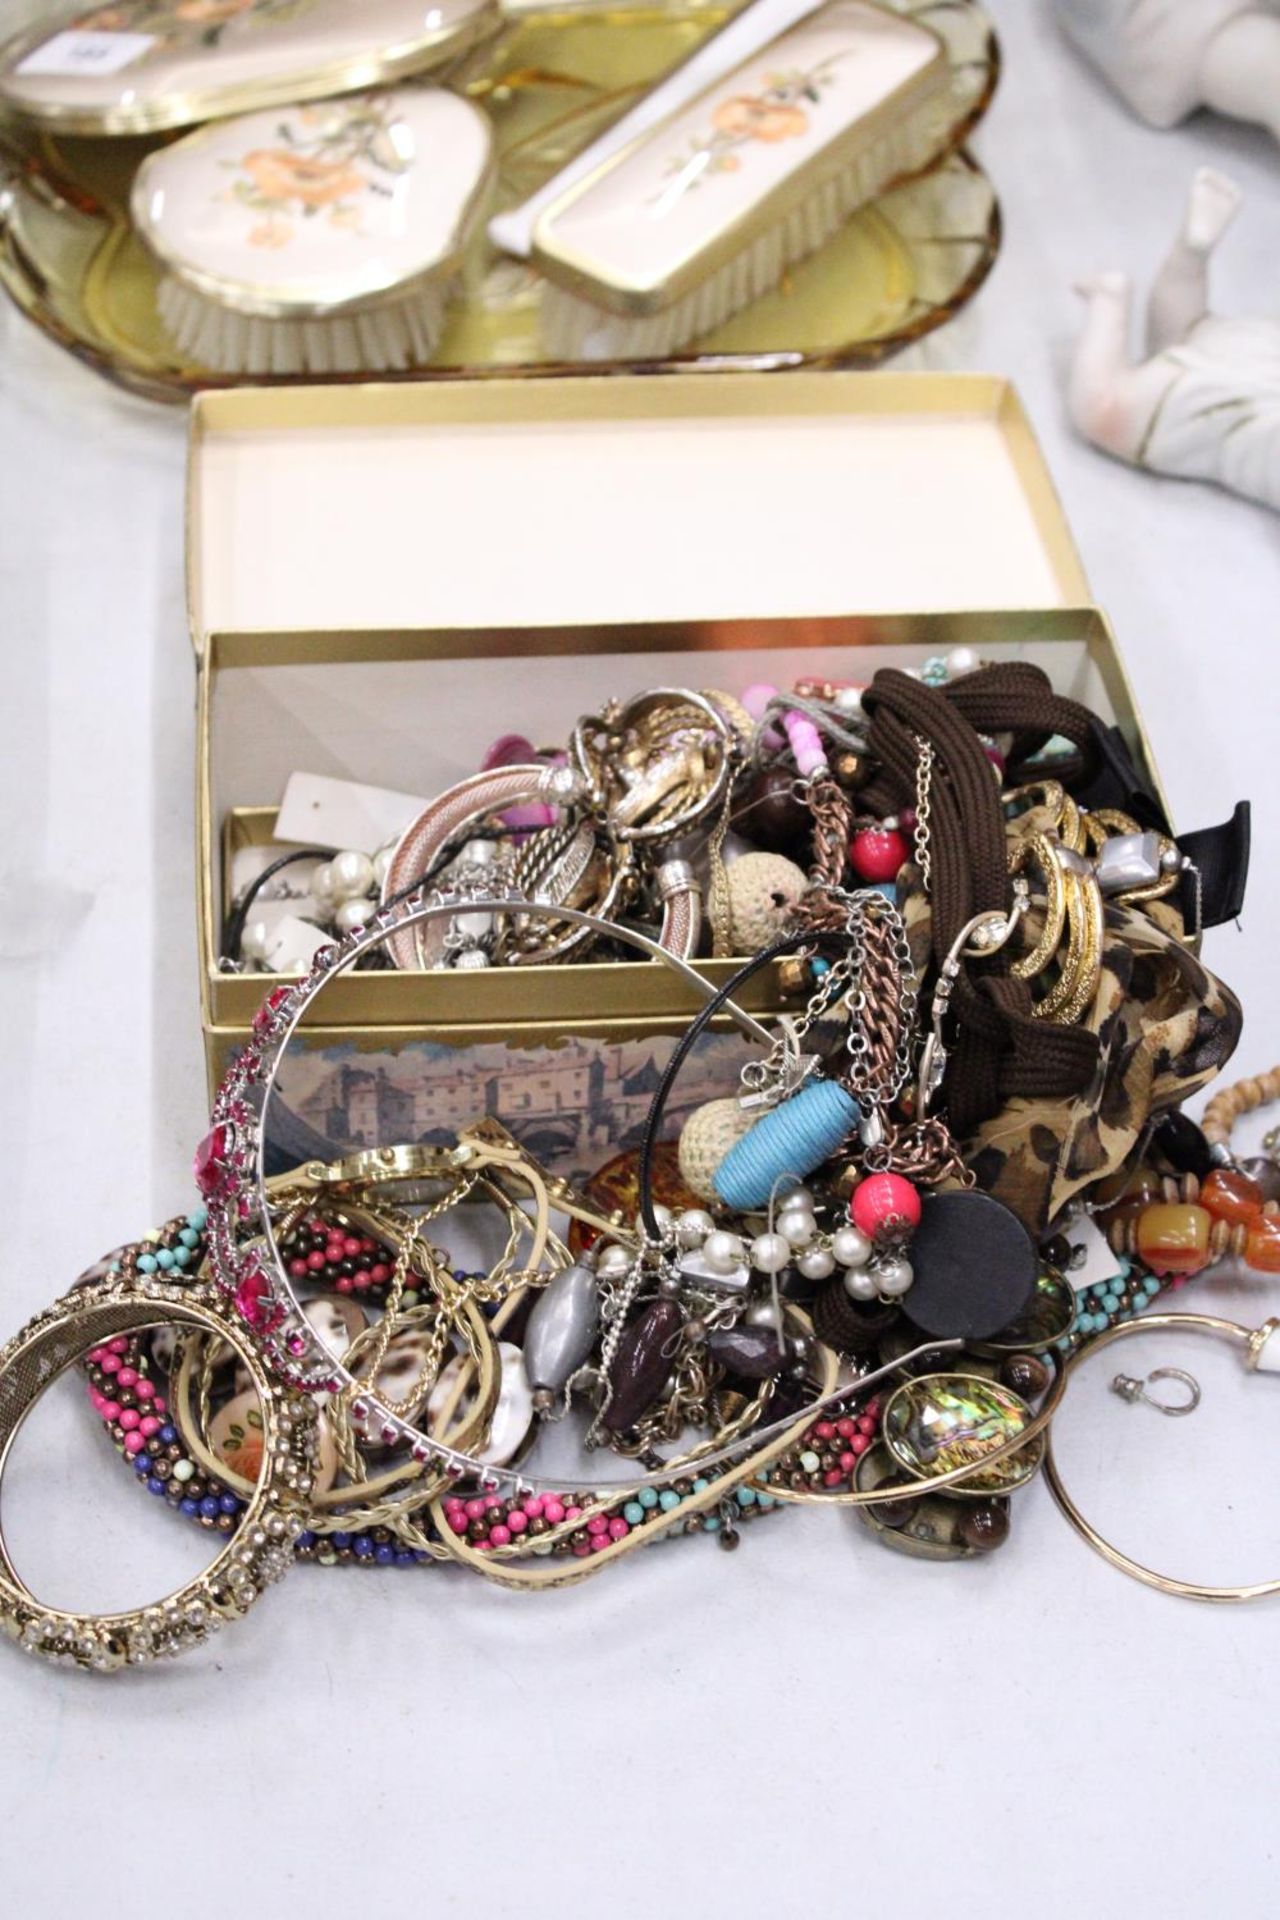 A QUANTITY OF COSTUME JEWELLERY TO INCLUDE NECKLACES, EARRINGS, BANGLES, ETC, IN A DOMED BOX